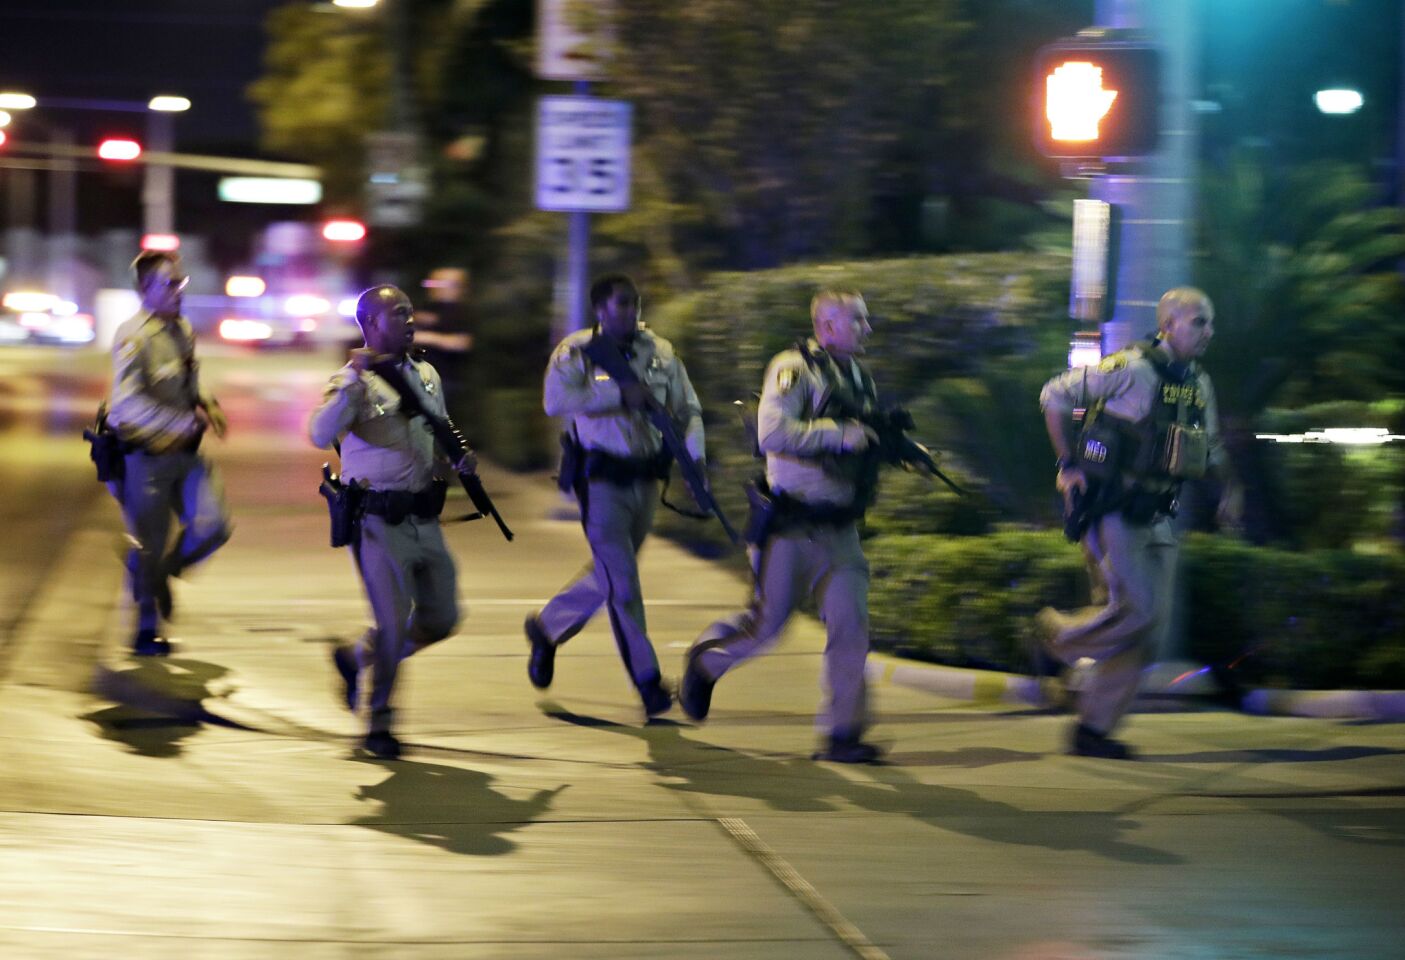 Police run to cover at the scene of a shooting near the Mandalay Bay resort and casino on the Las Vegas Strip.